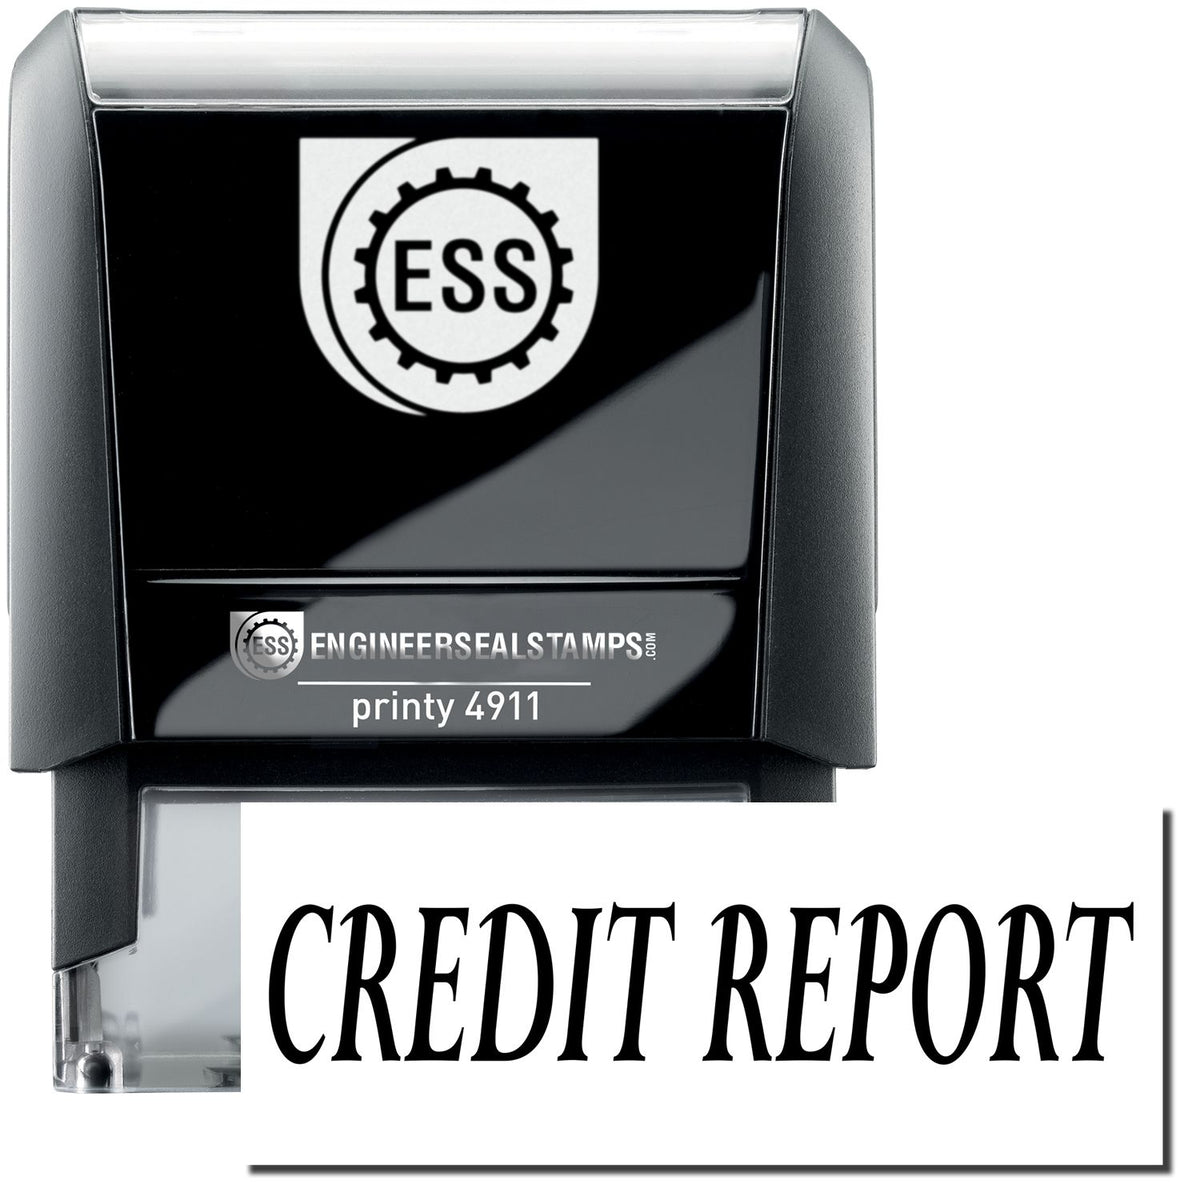 A self-inking stamp with a stamped image showing how the text &quot;CREDIT REPORT&quot; is displayed after stamping.